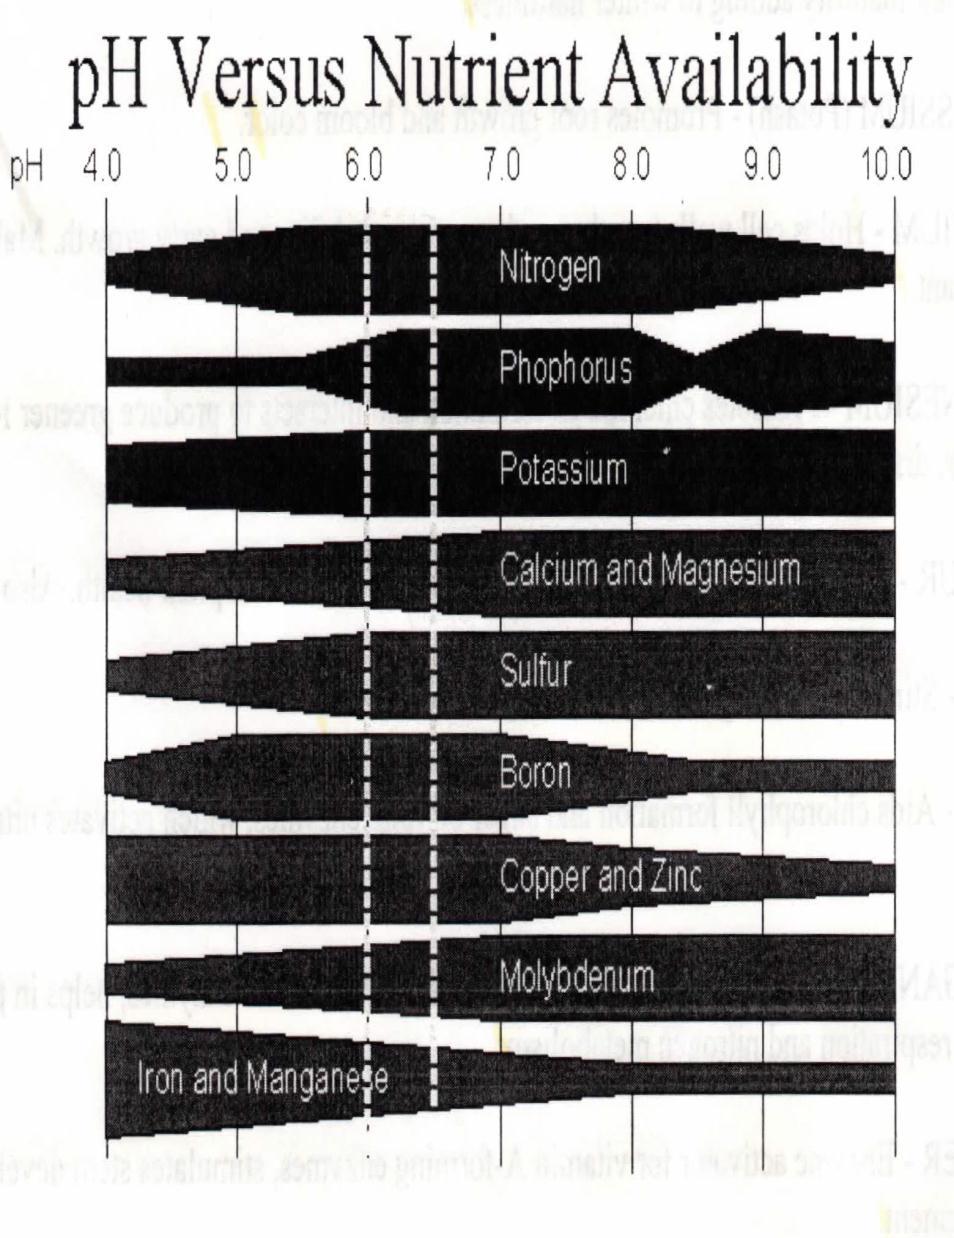 Availability of Nutrients Your rosebush will absorb most nutrients within the ph range of 6.0 and 6.